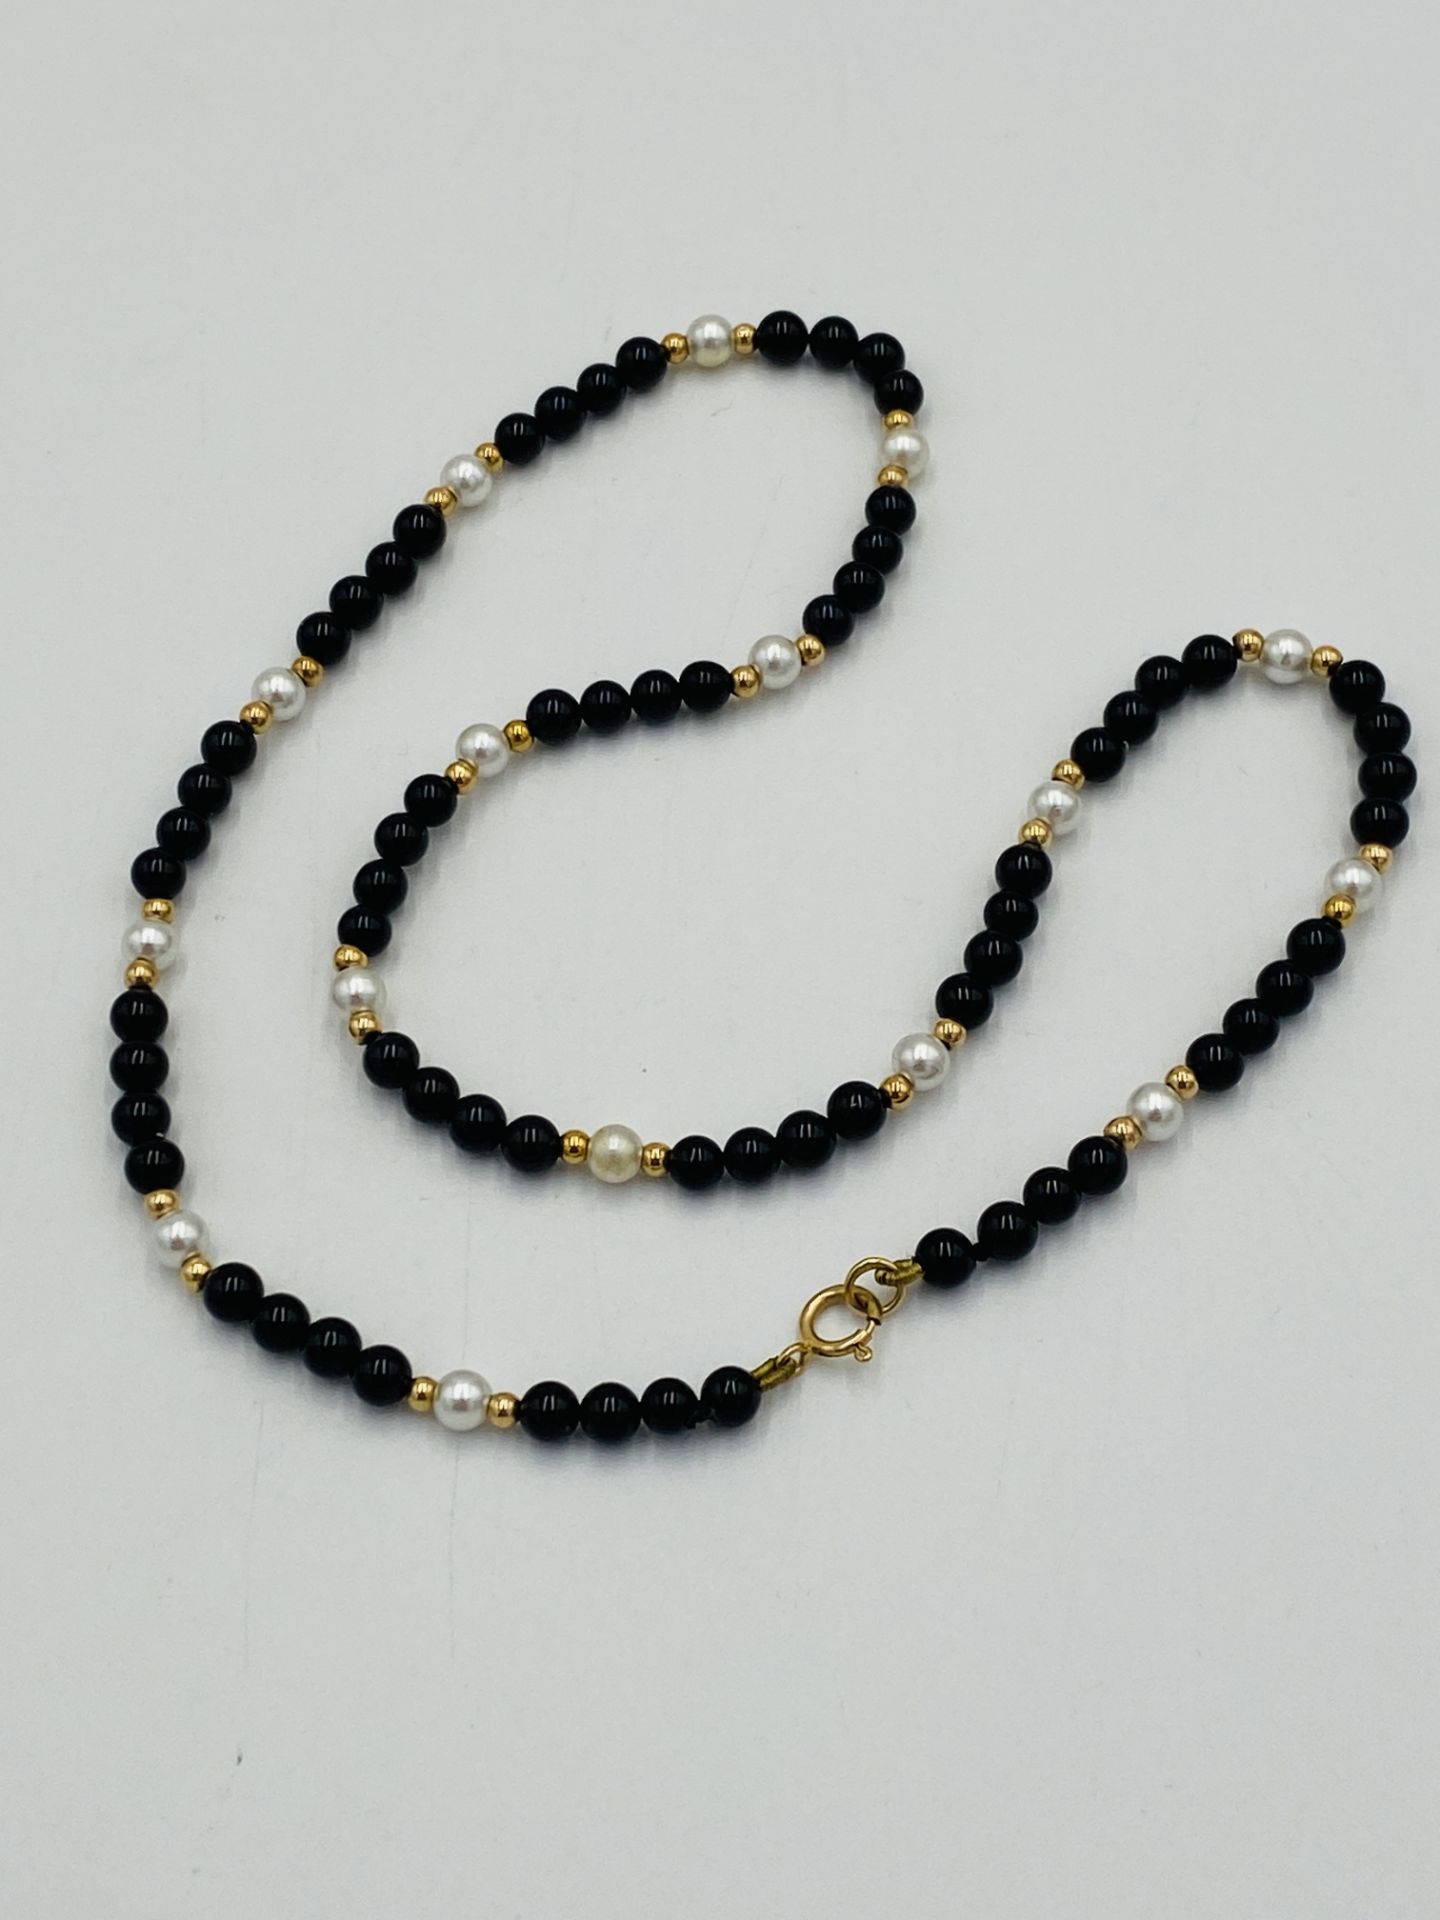 Bead necklace with 9ct gold clasp,together with matching earrings - Image 4 of 6